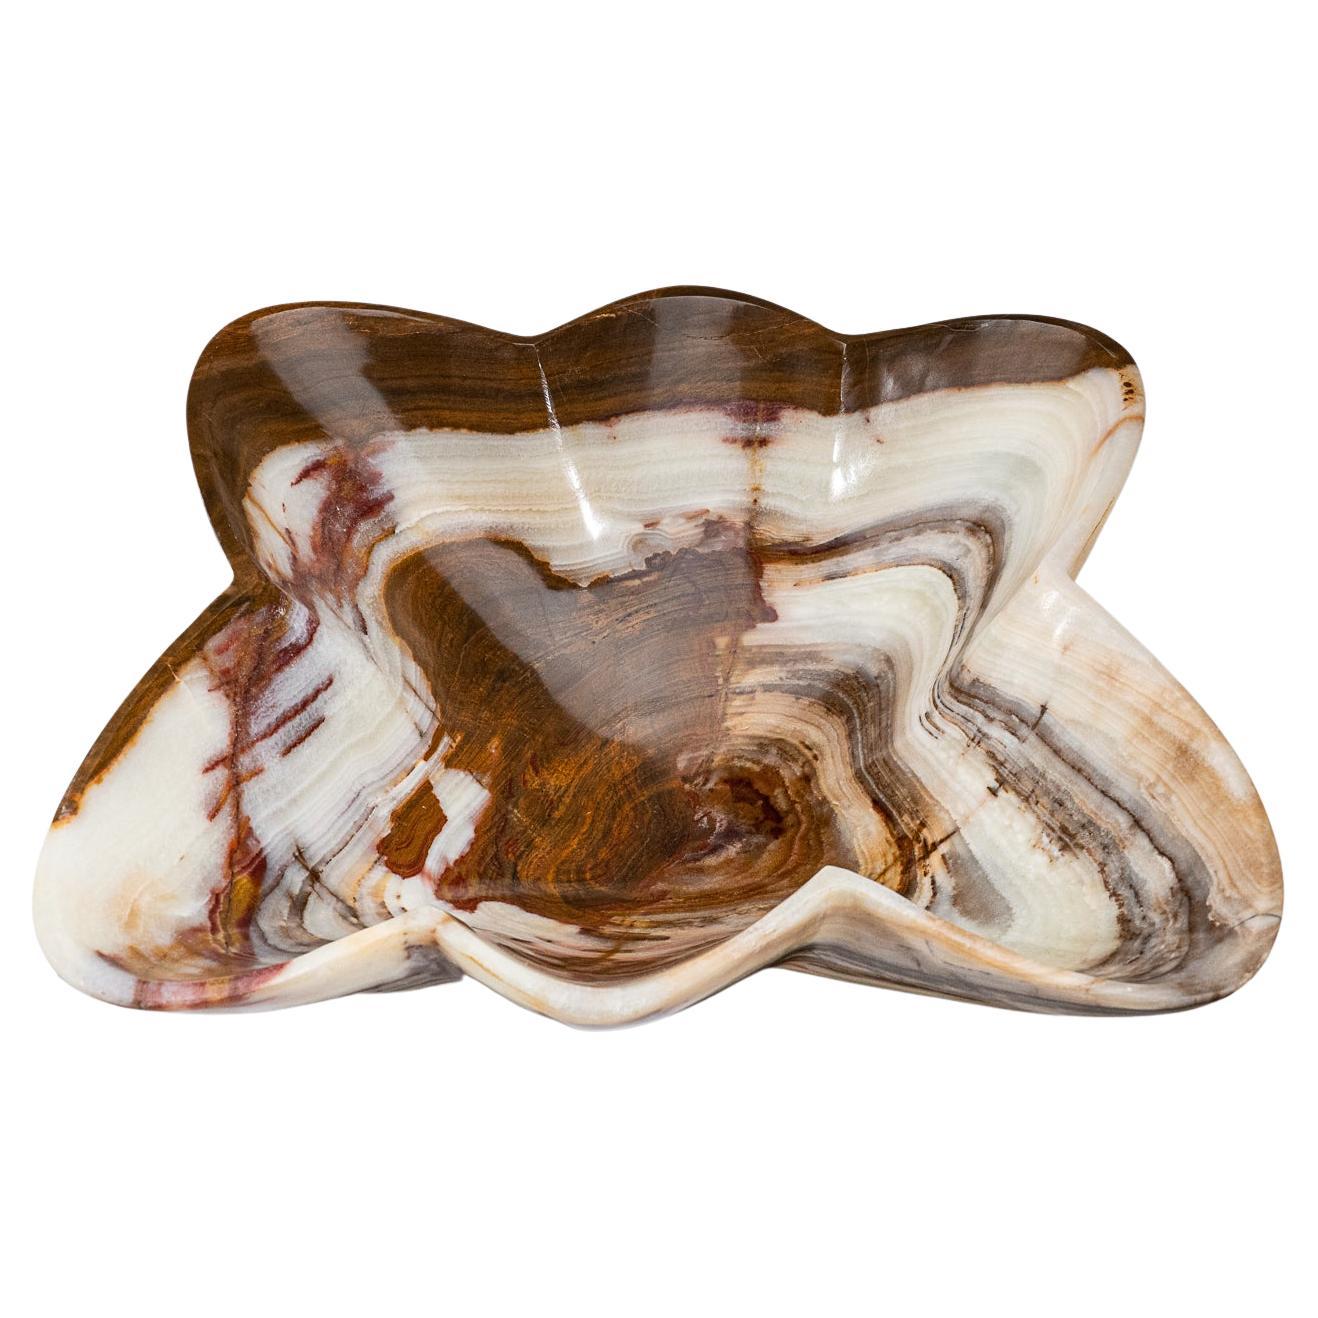 Genuine Polished Brown and White Onyx Bowl from Mexico  (7.2 lbs)